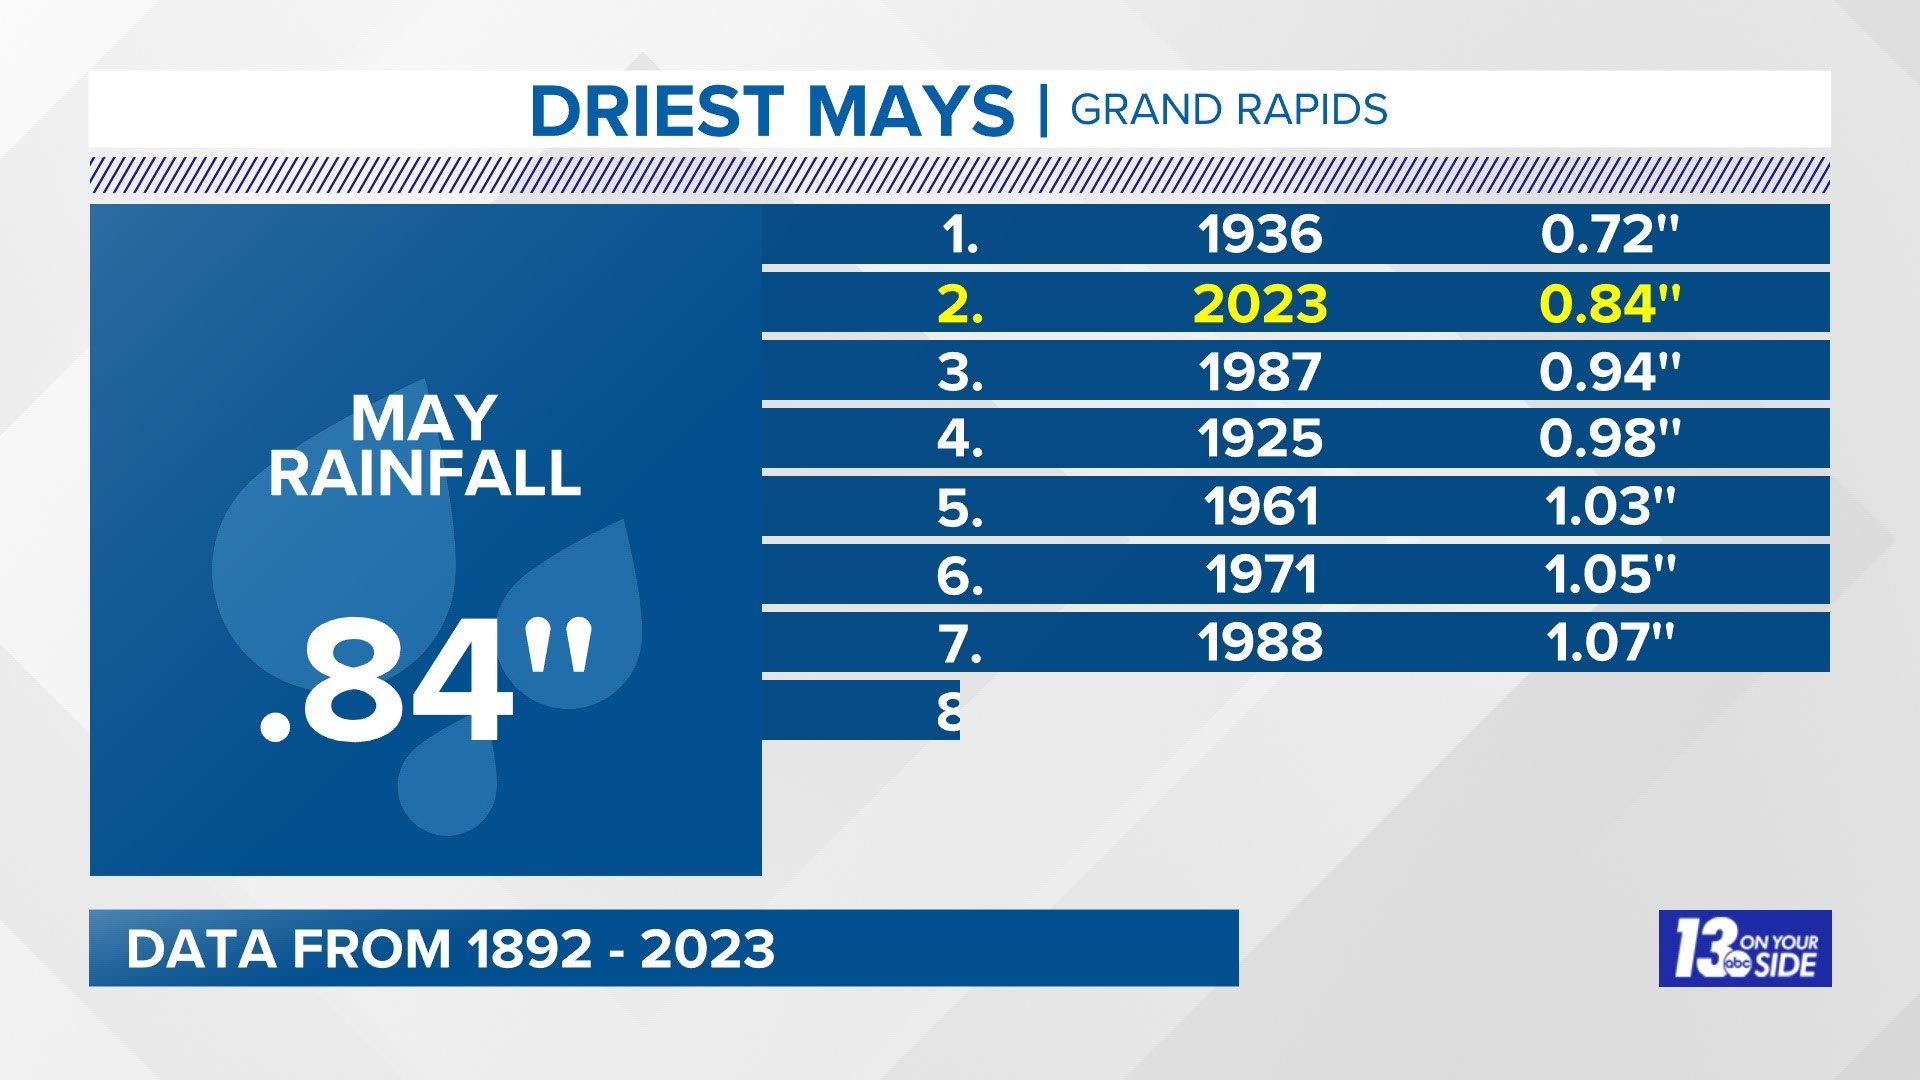 Rainfall for May 2023 will likely be the second driest in Grand Rapids.